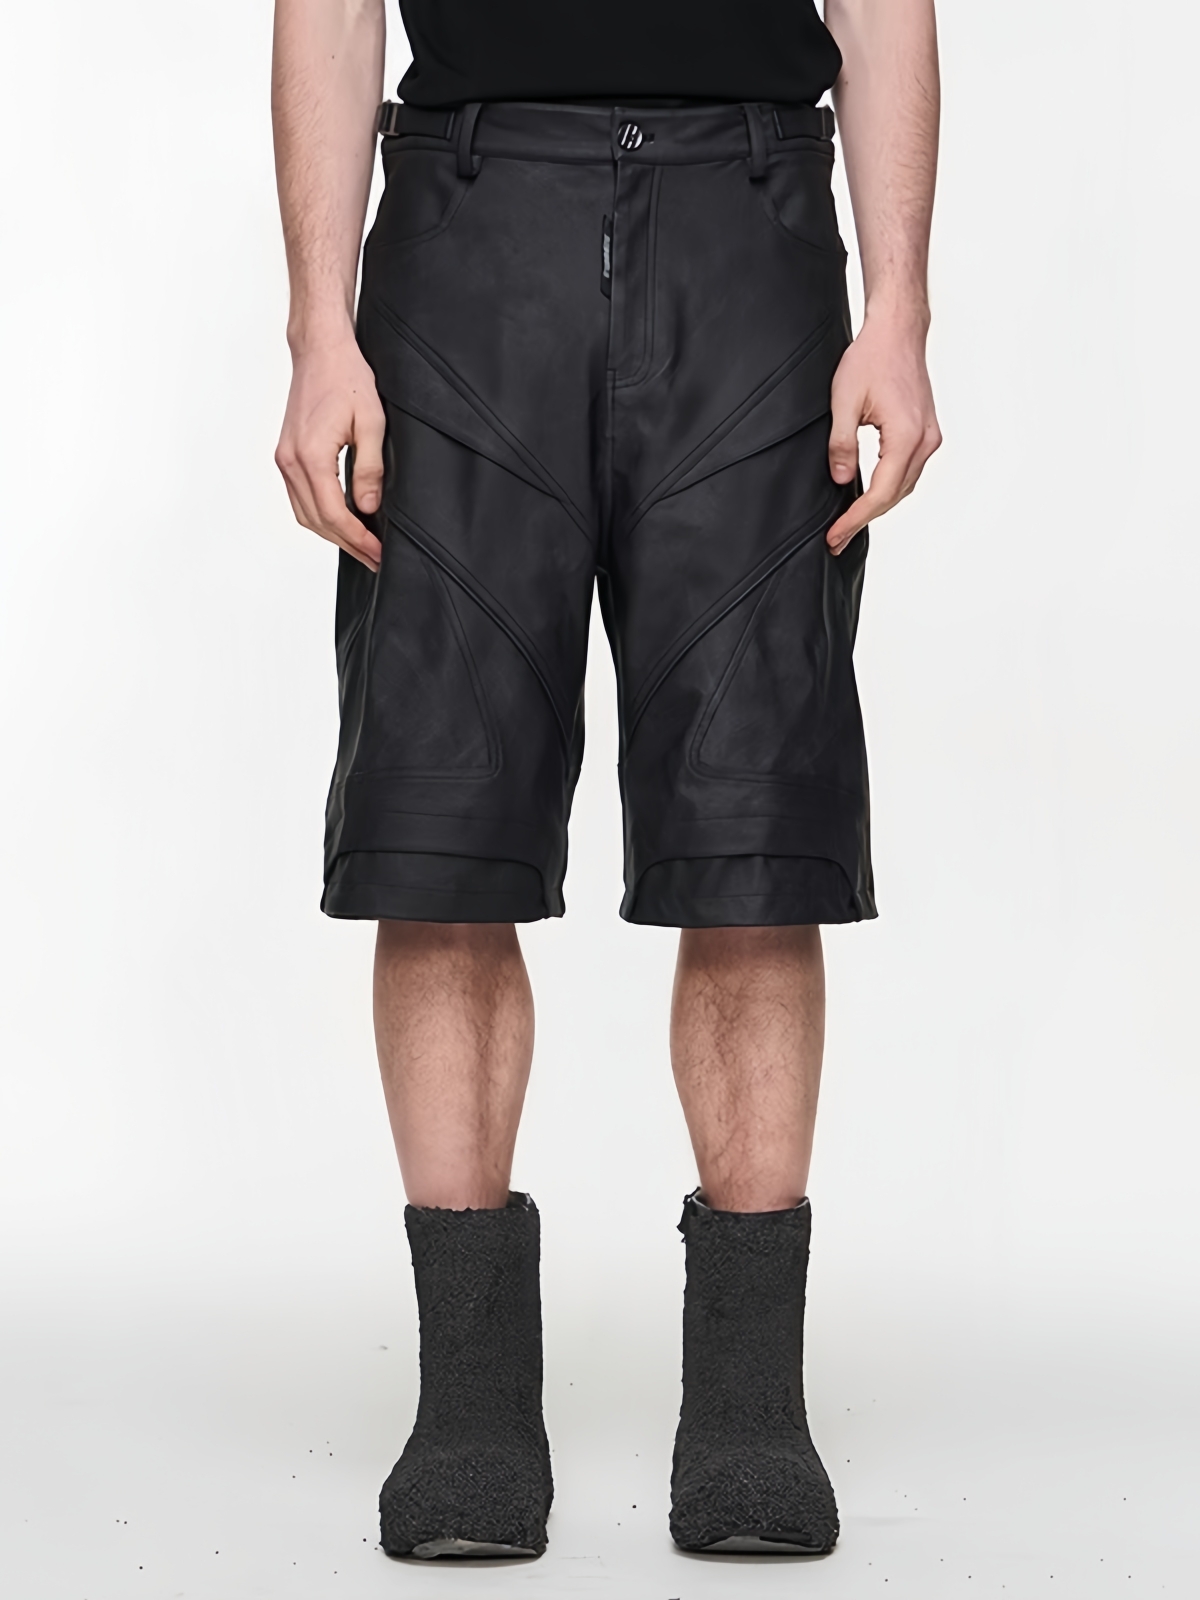 BLINDNOPLAN 24SS Motorcycle-inspired Patchwork Leather Shorts